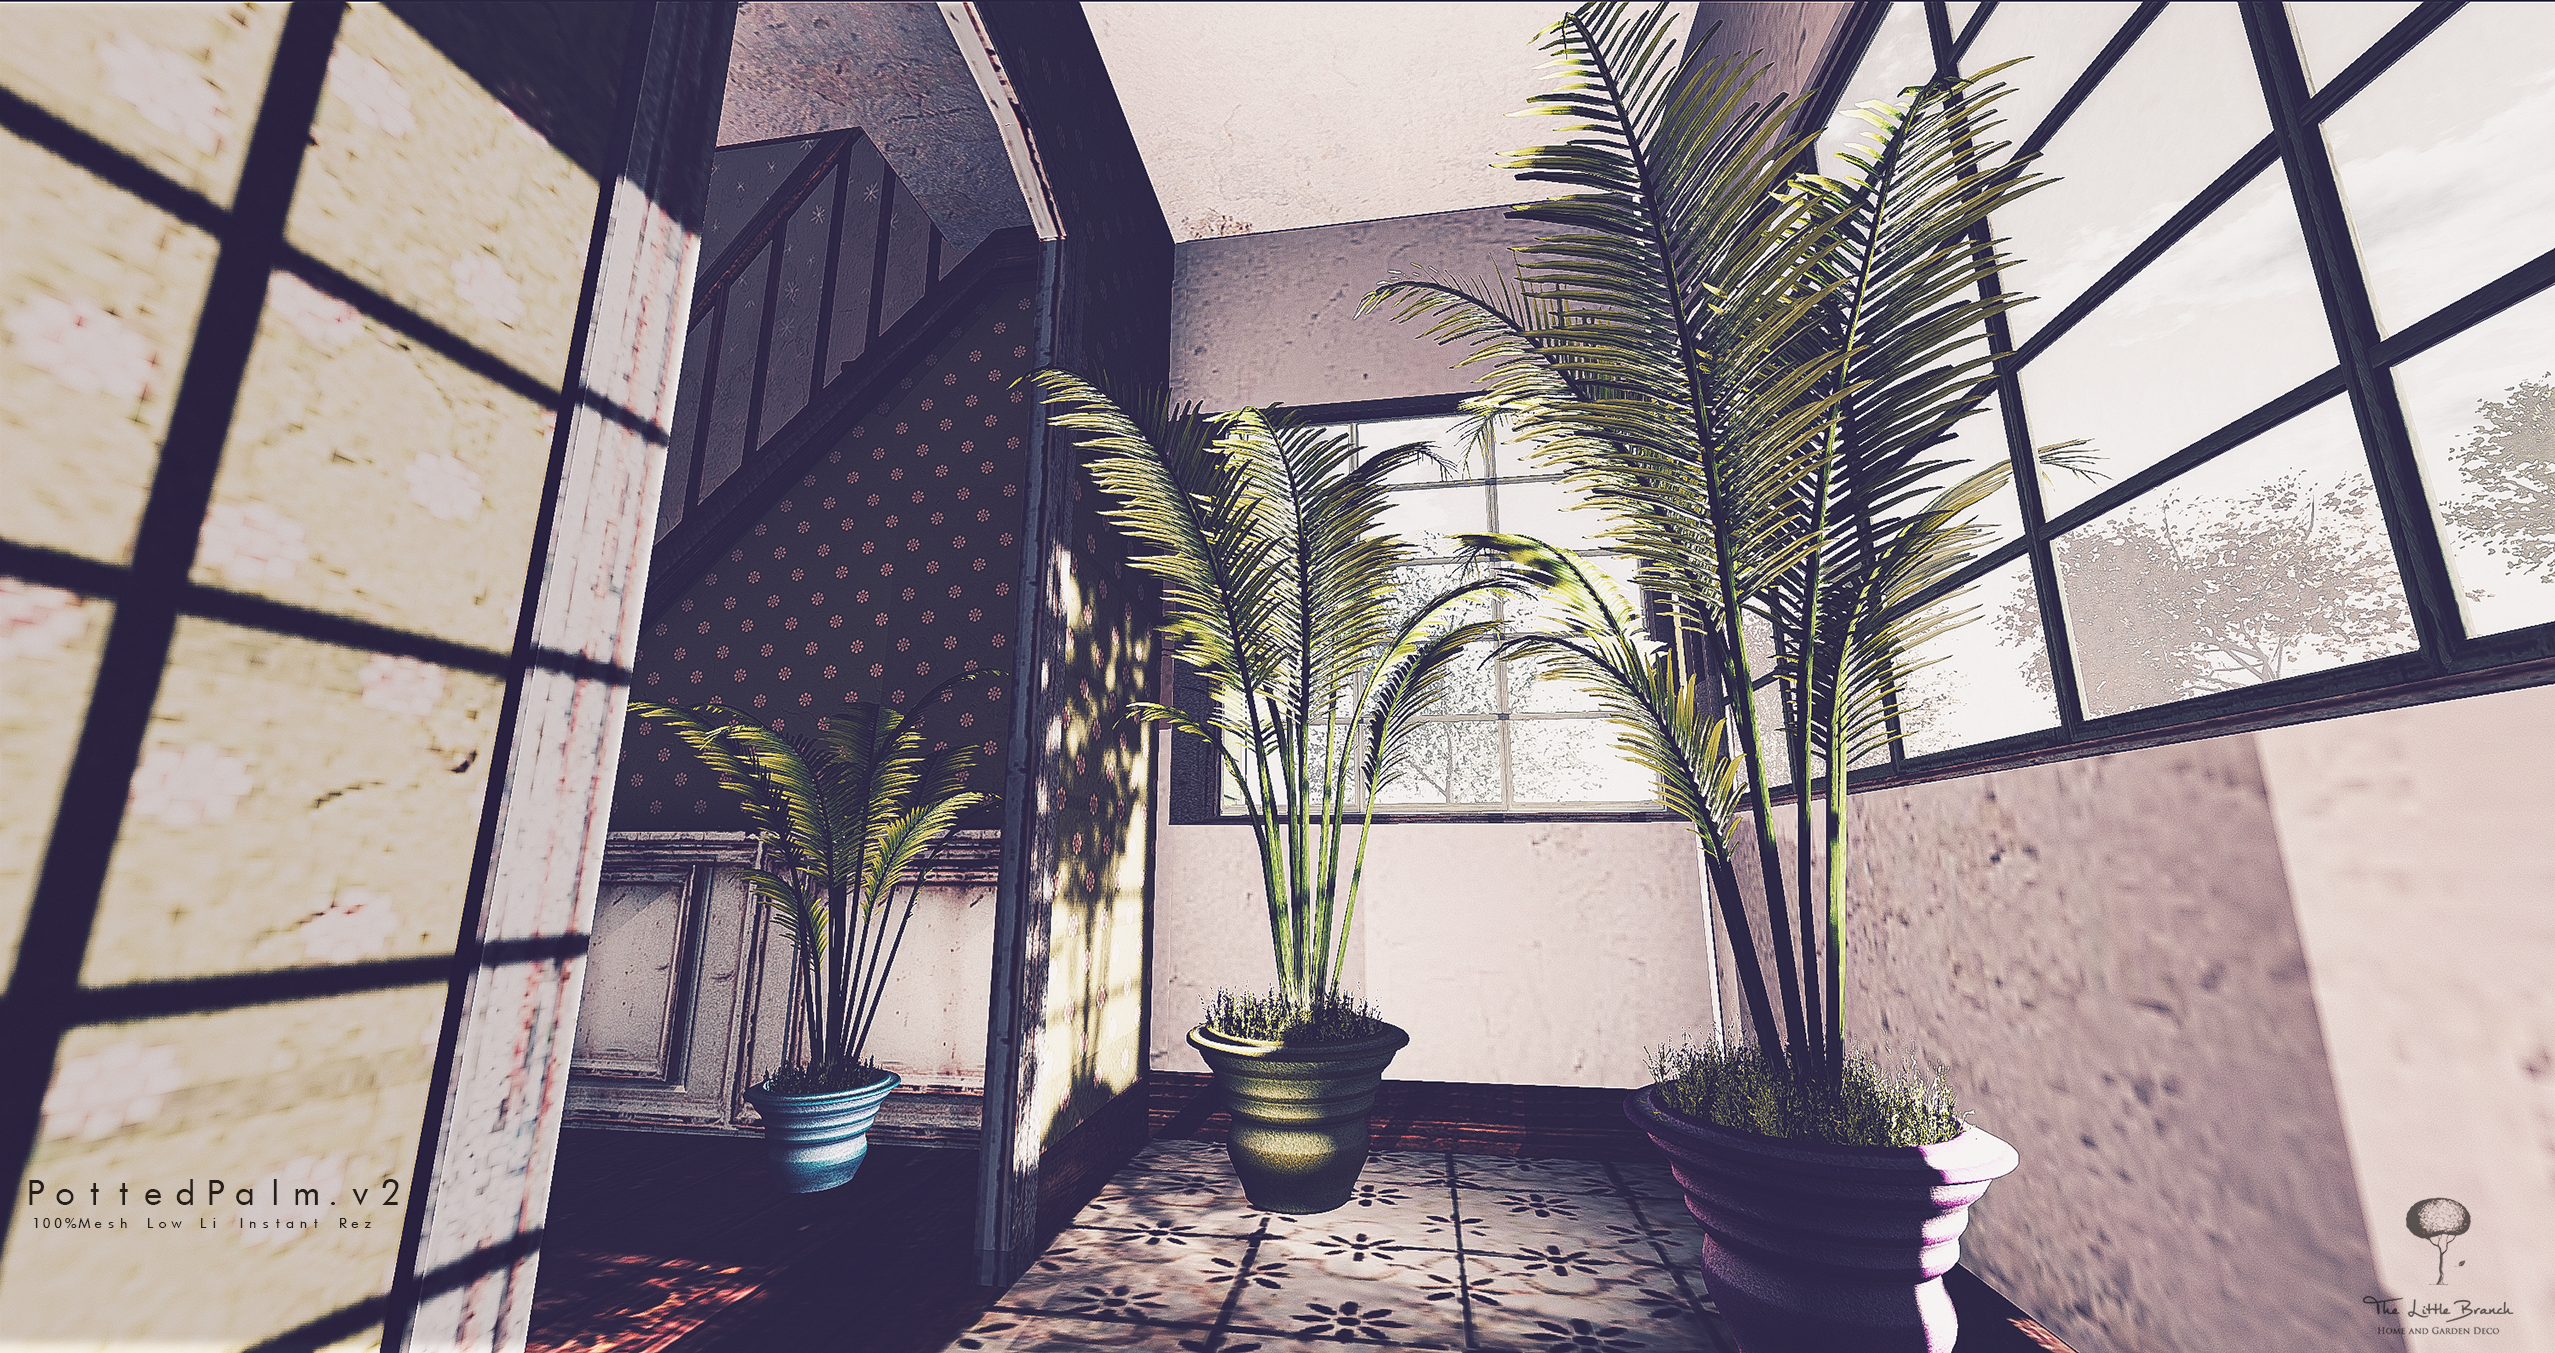 The Little Branch – Potted Palm V2